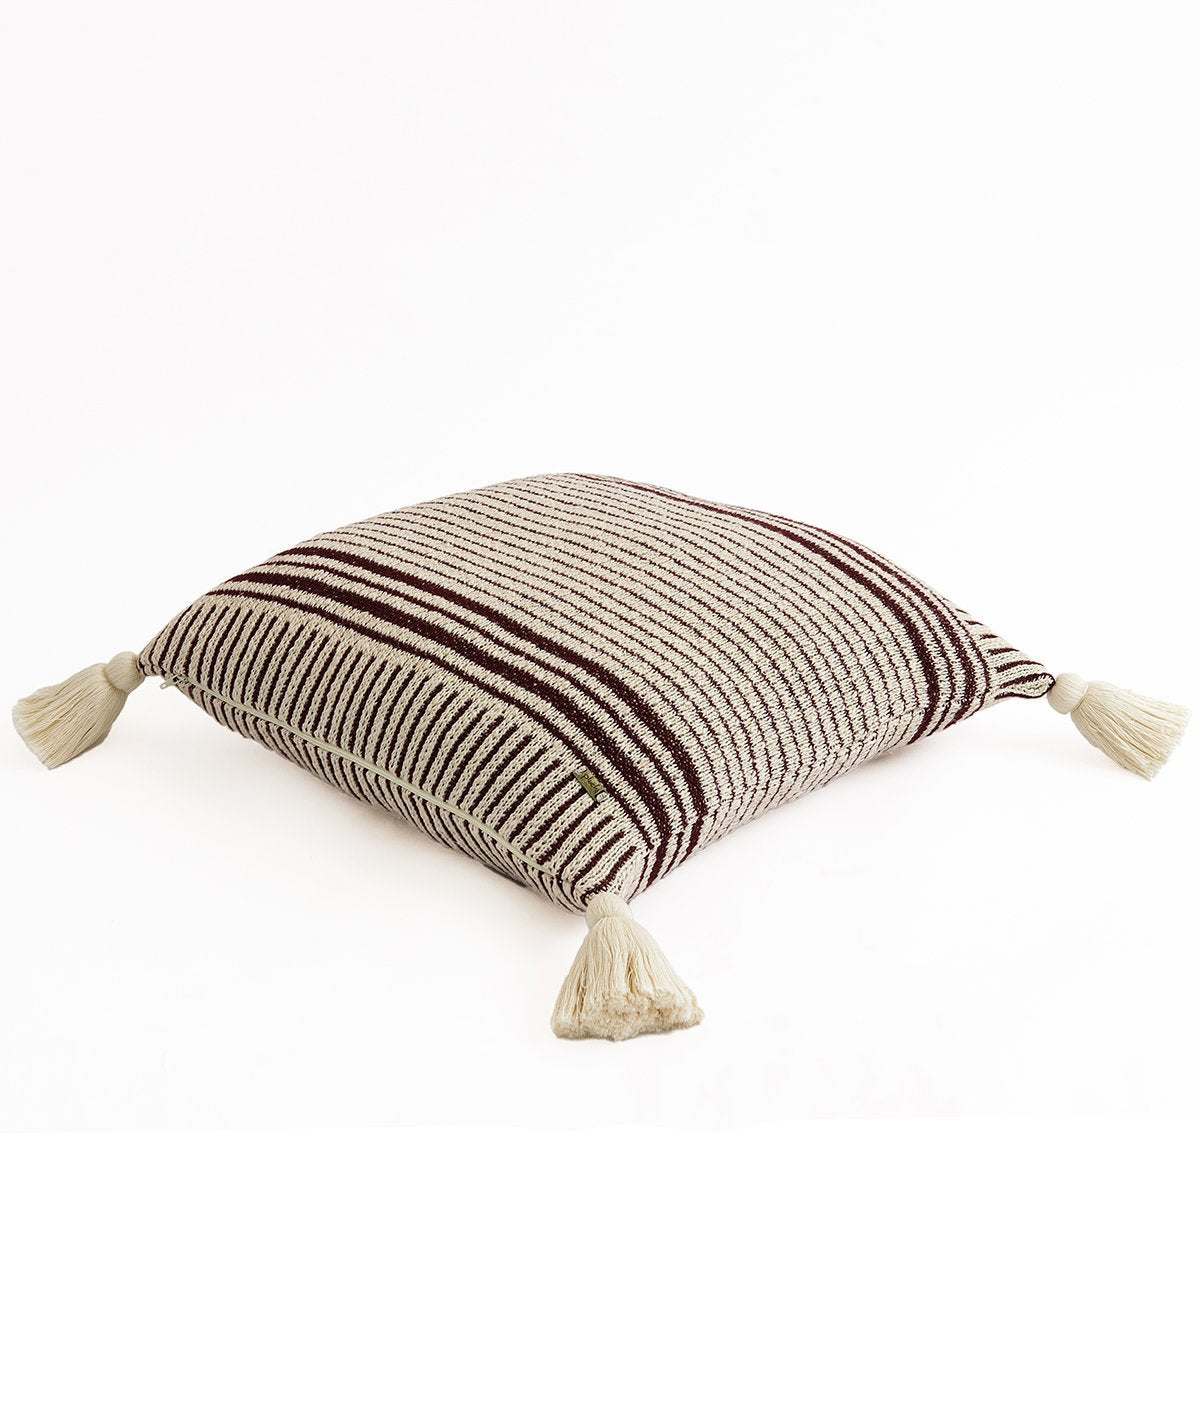 Stripe Square Cotton Knitted Decorative Natural & Maroon Color 18 x 18 Inches Cushion Cover